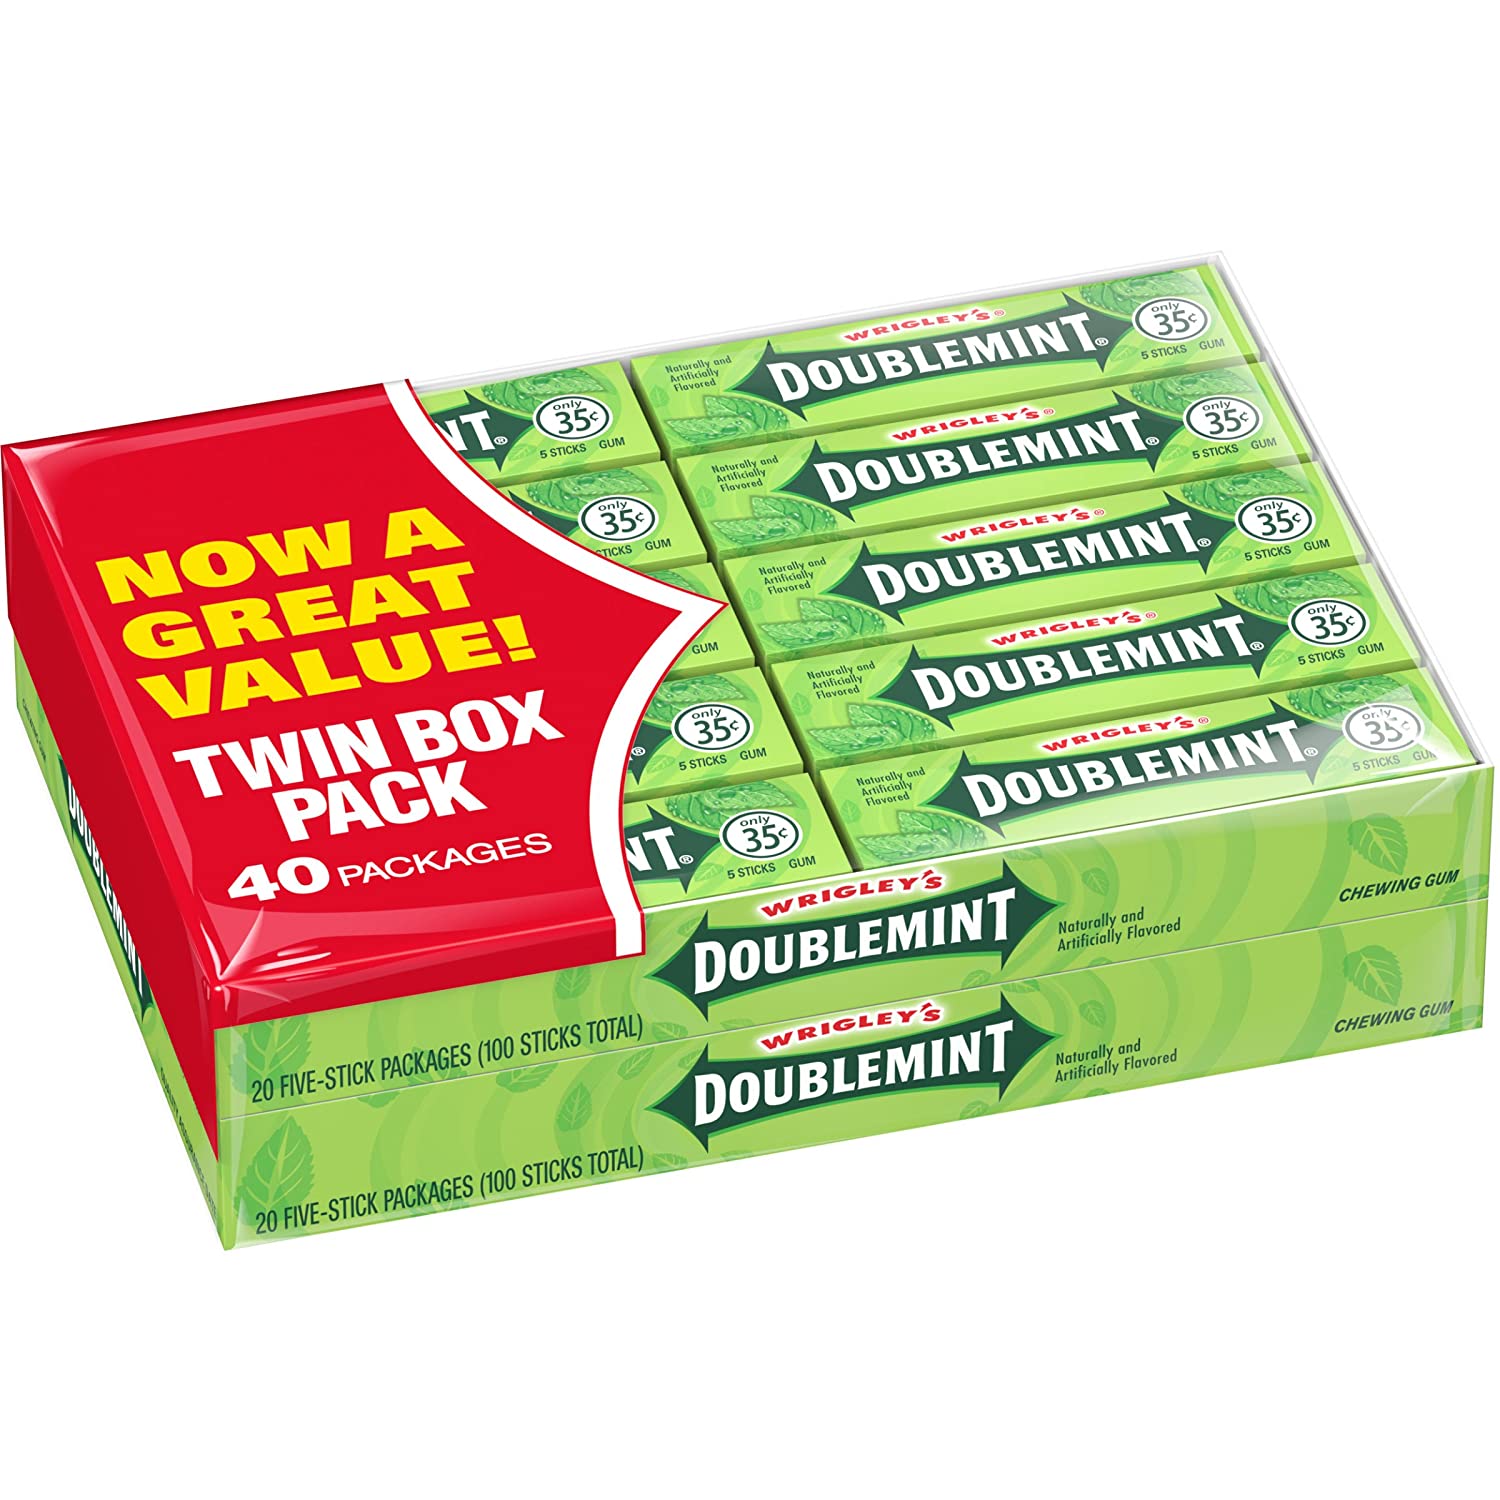 40-Pack Wrigley's Doublemint Chewing Gum $5.84 w/ S&S + Free Shipping w/ Amazon Prime or Orders $25+